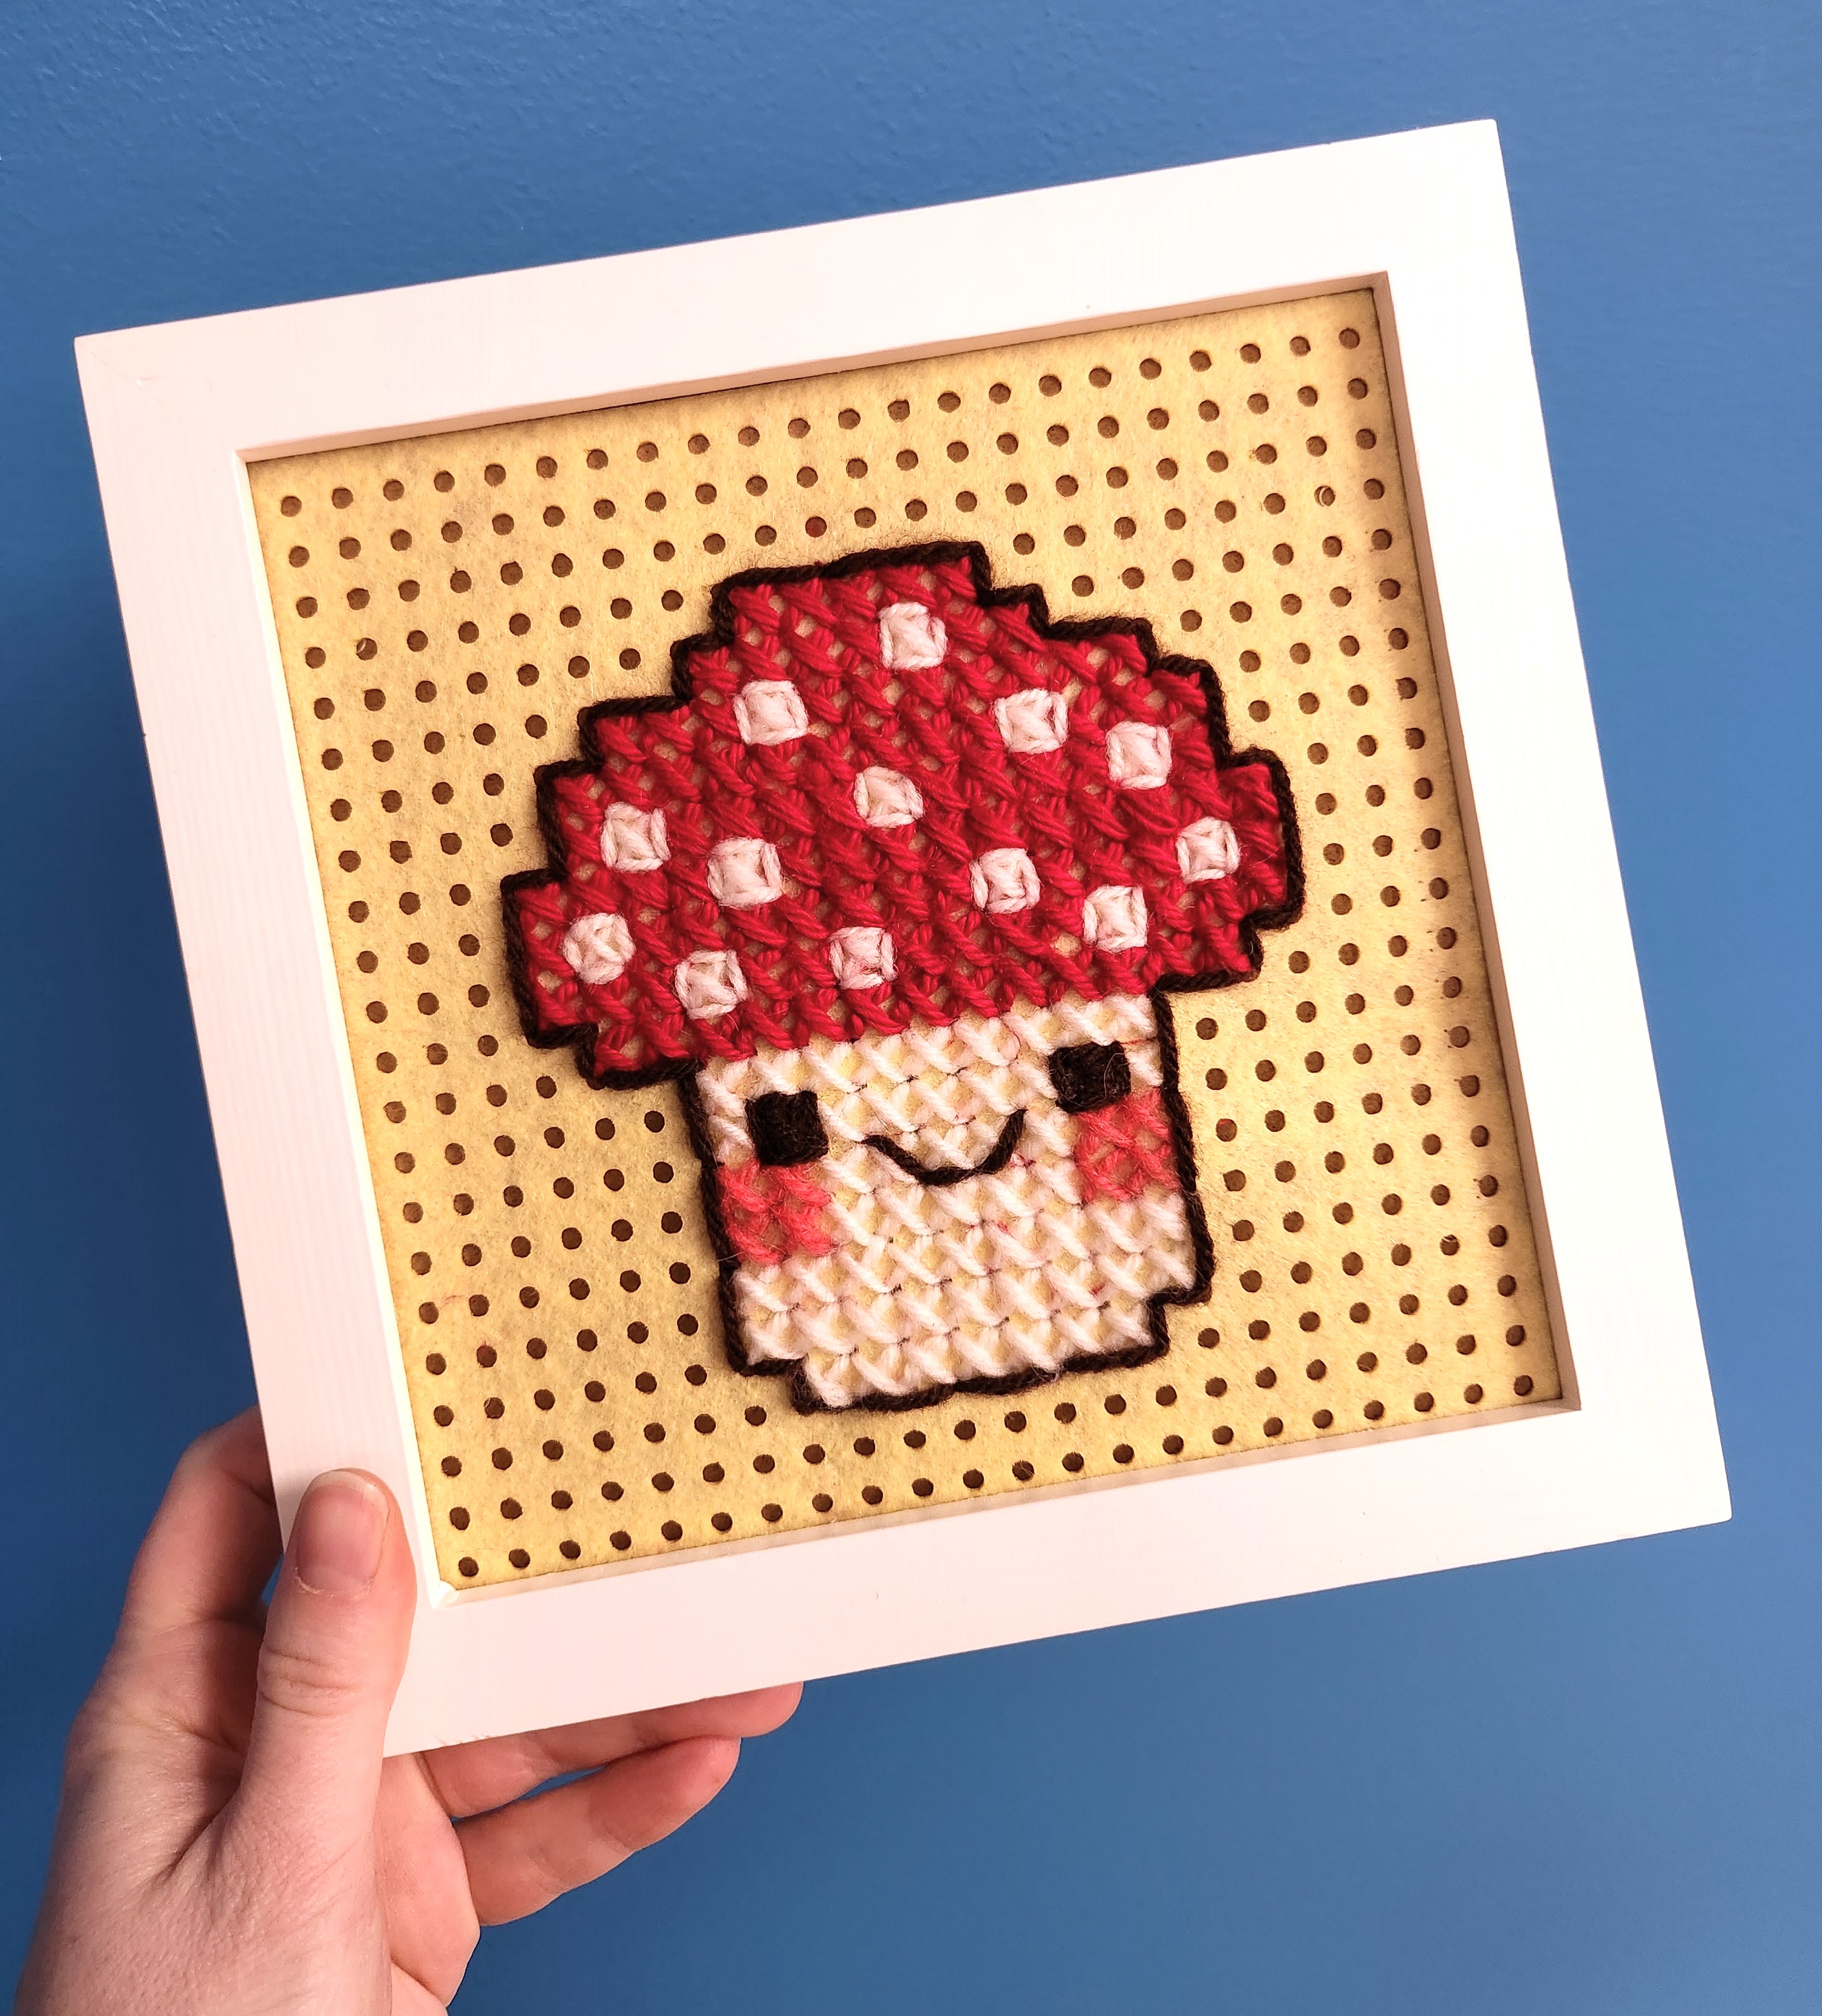 Hand holding a large cross stitch made with yarn in a wooden frame. The cross stitch is of a cute mushroom with eyes and a smiling mouth.